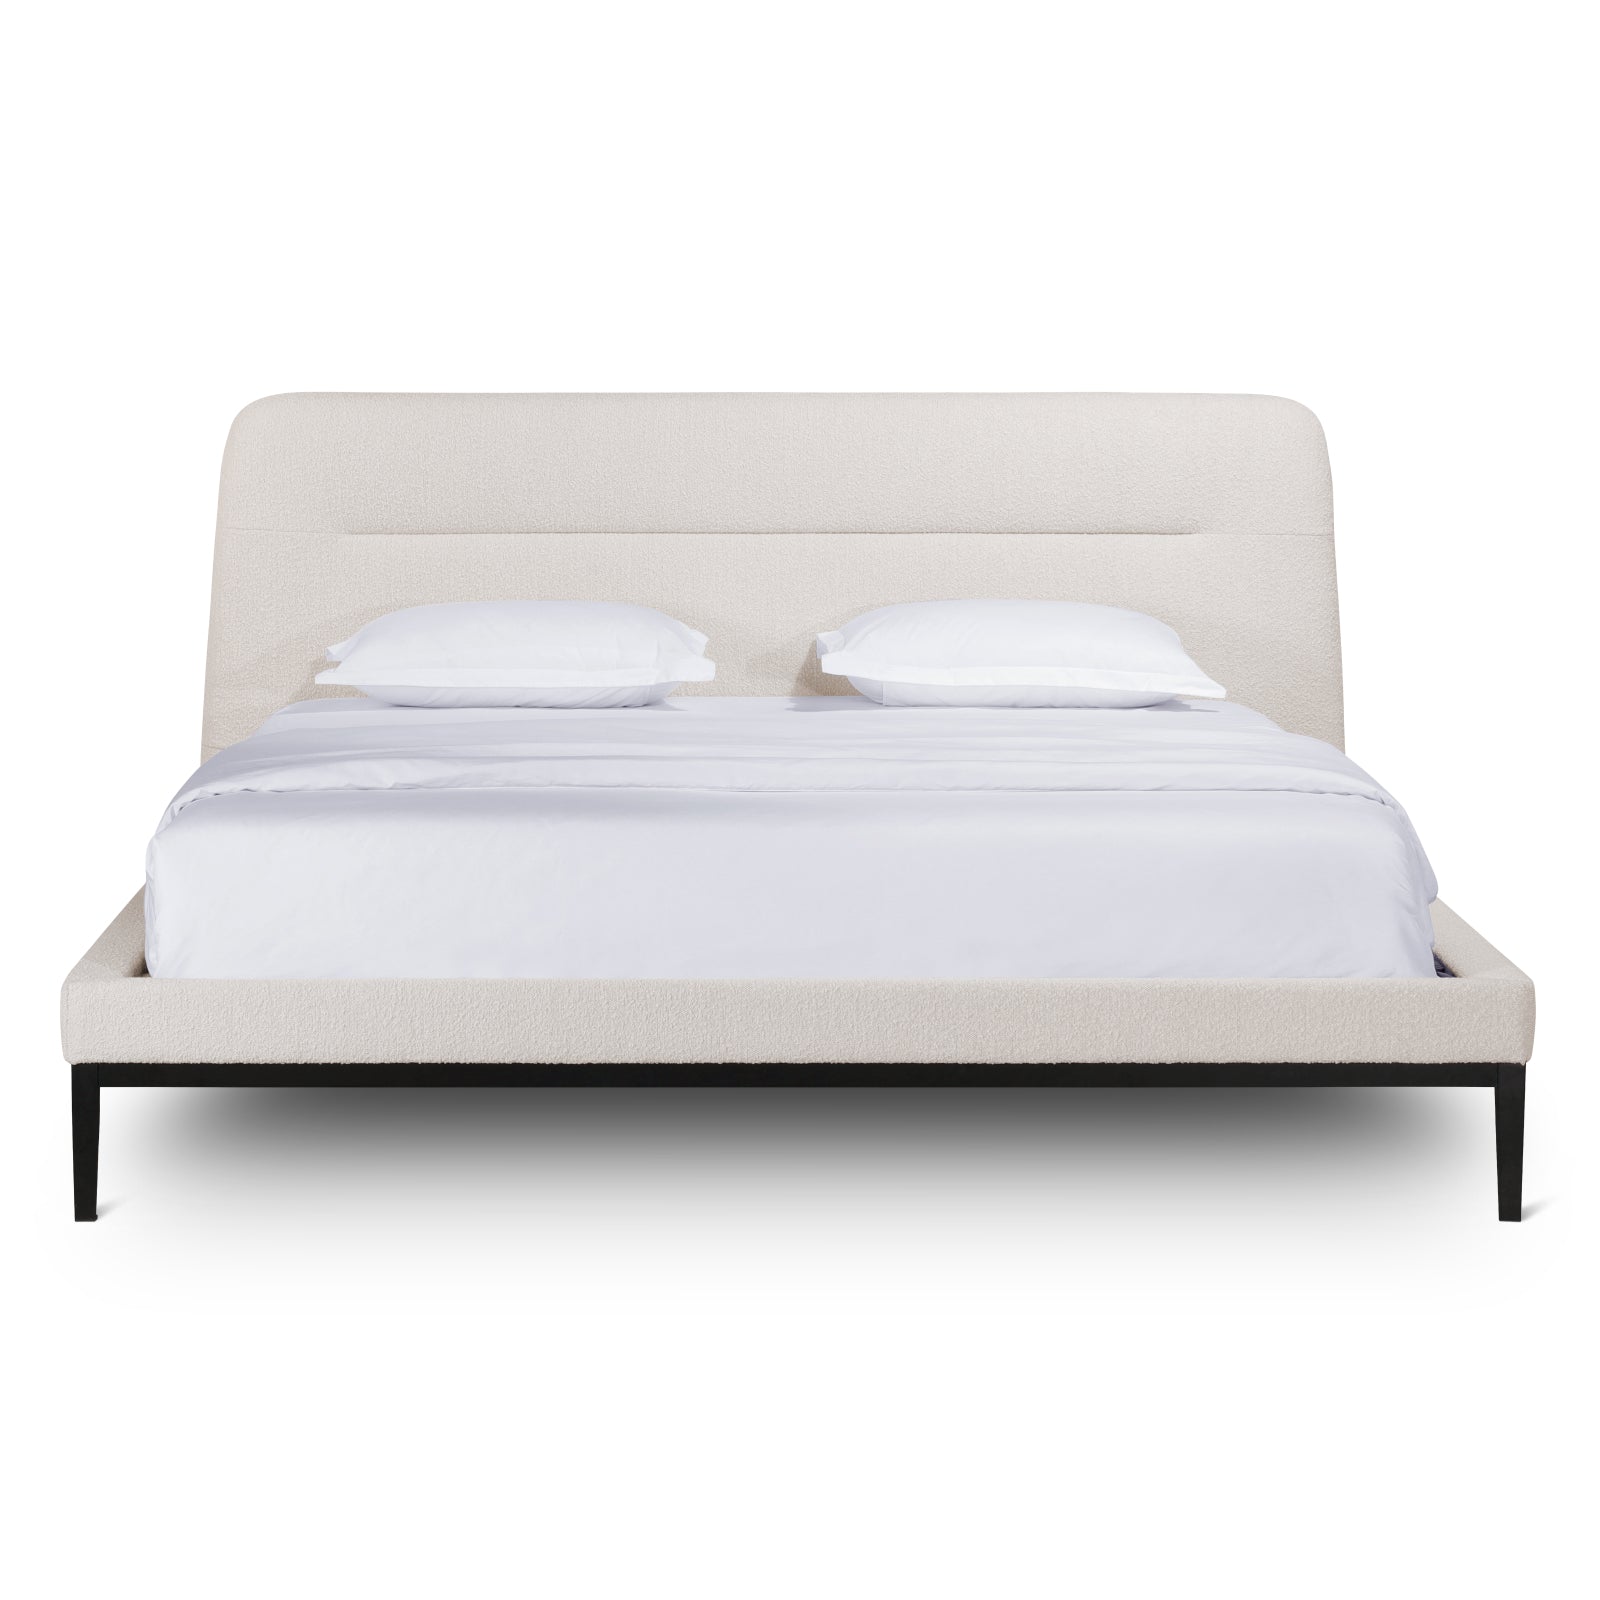 Lean On Me Bed, Queen, Cream Boucle - Image 9